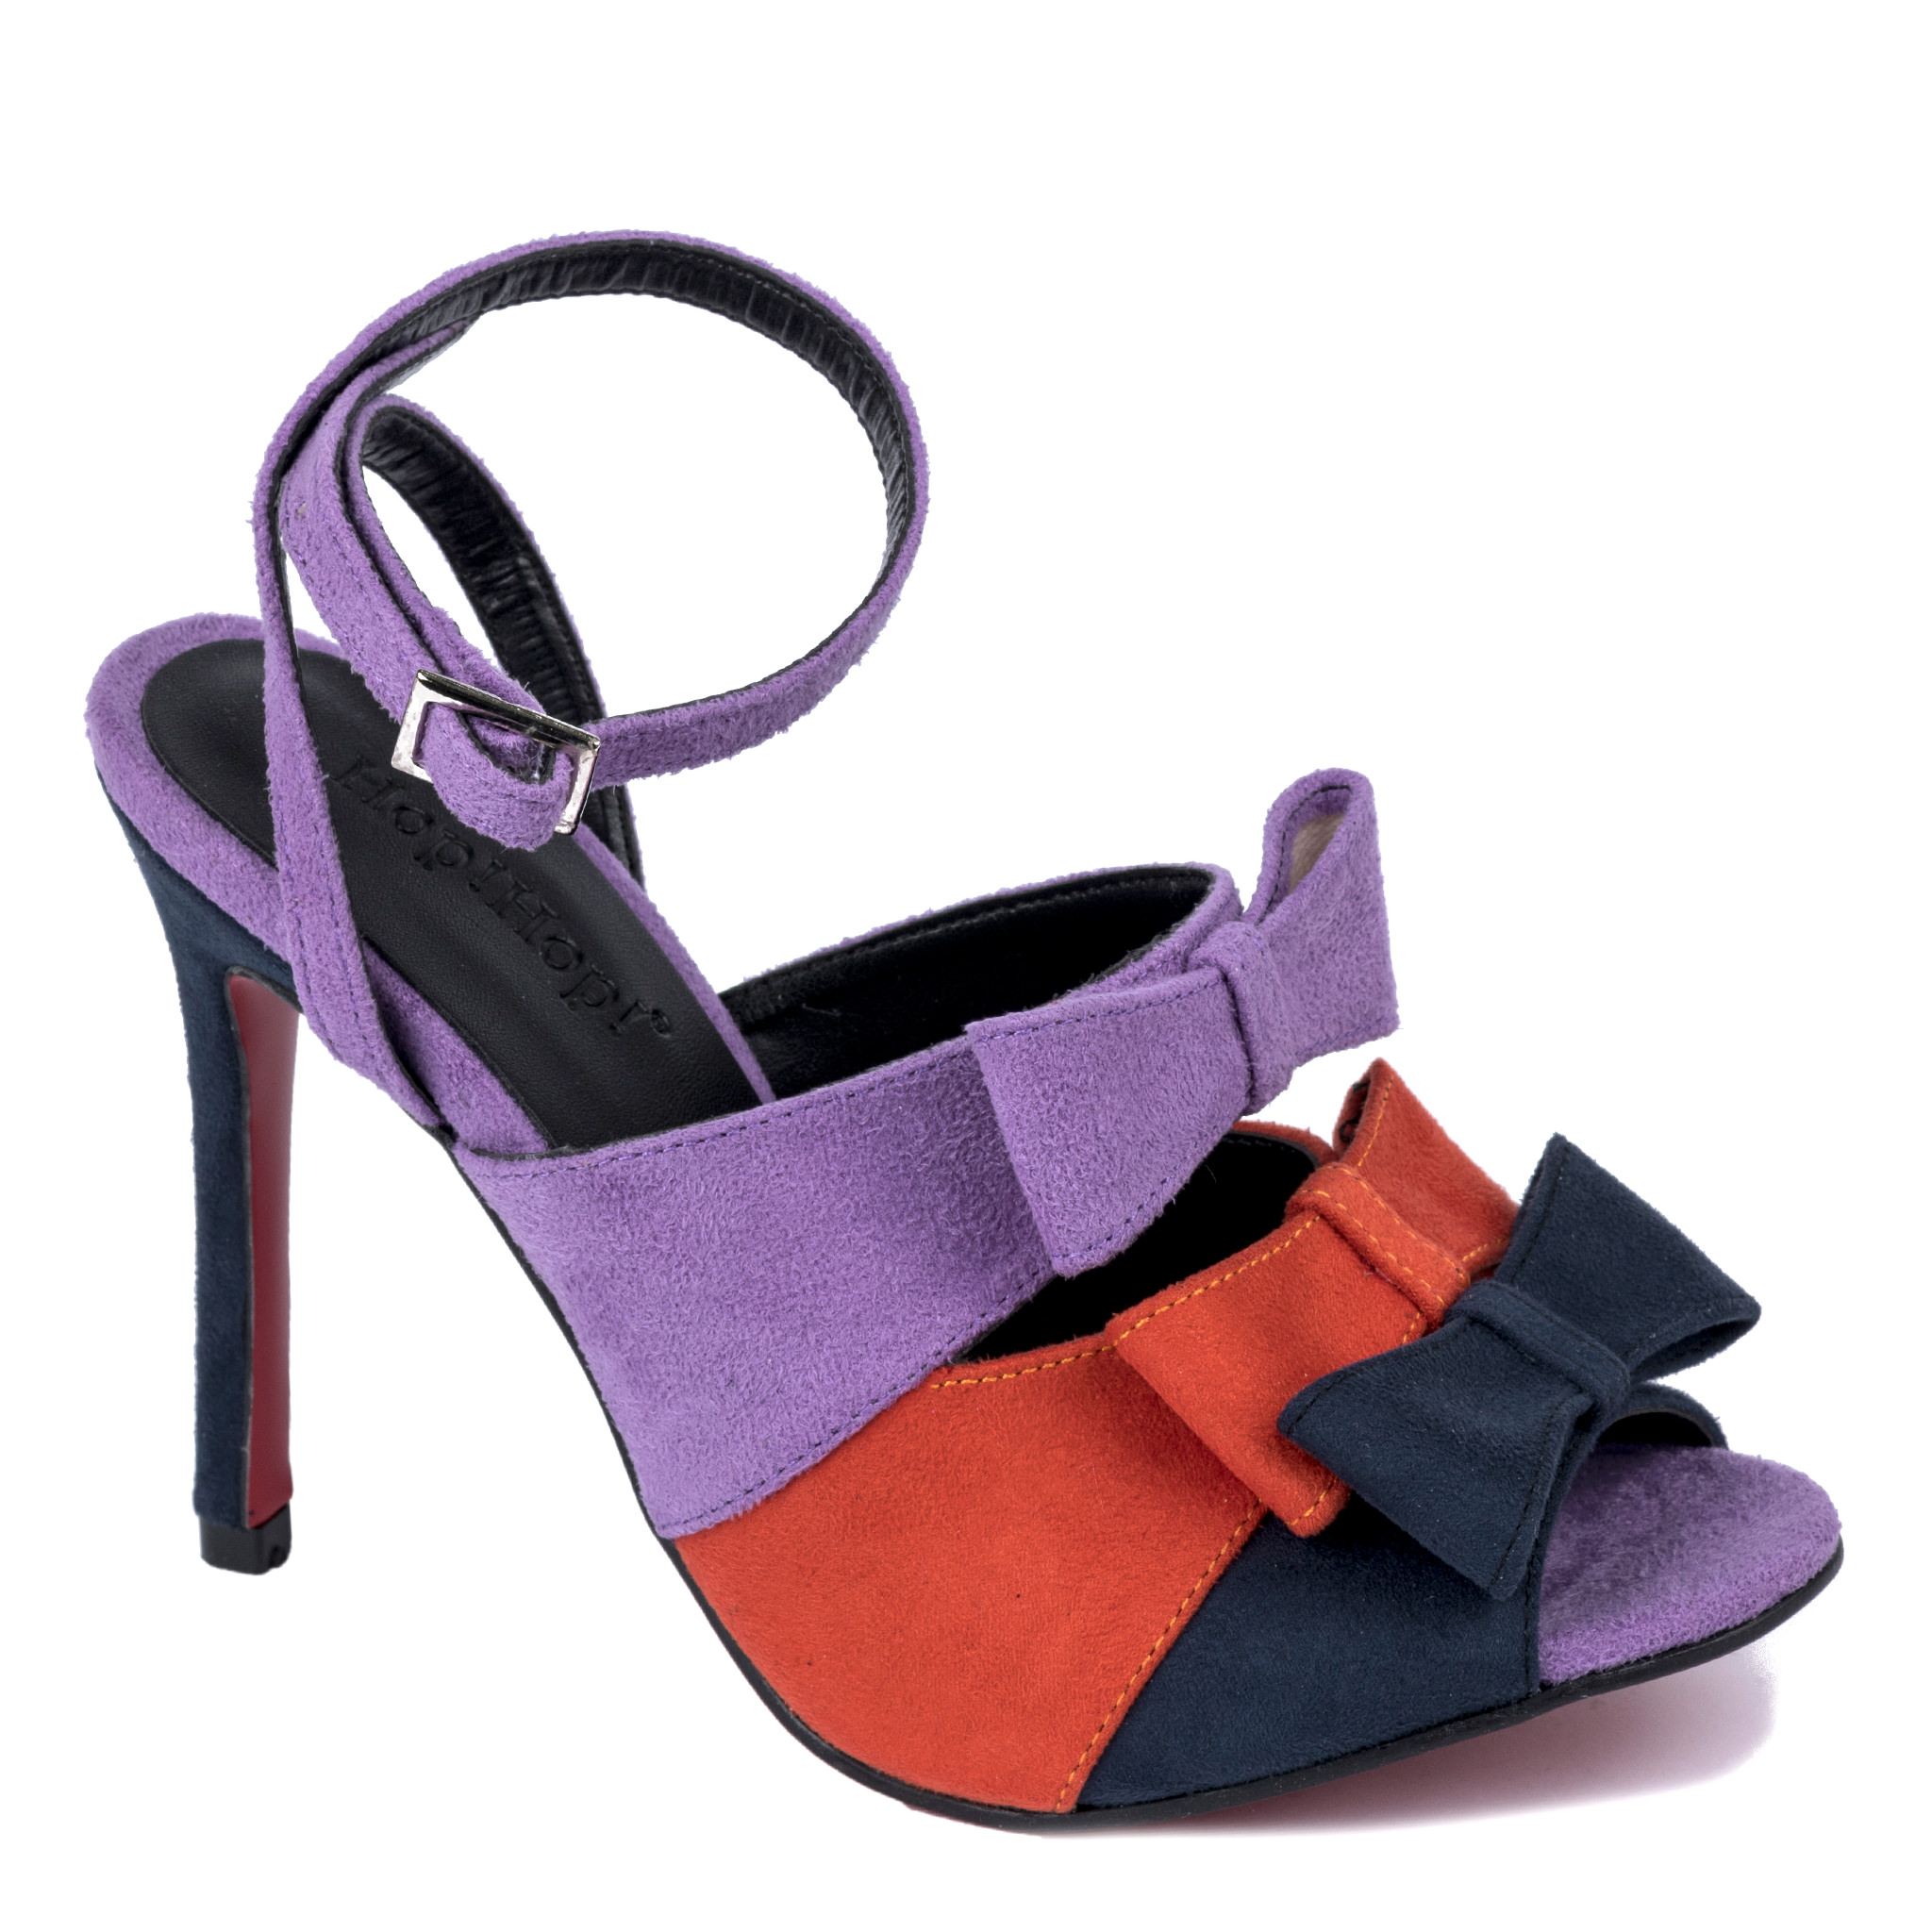 VELOUR THIN HEEL SANDALS WITH BOW - PURPLE